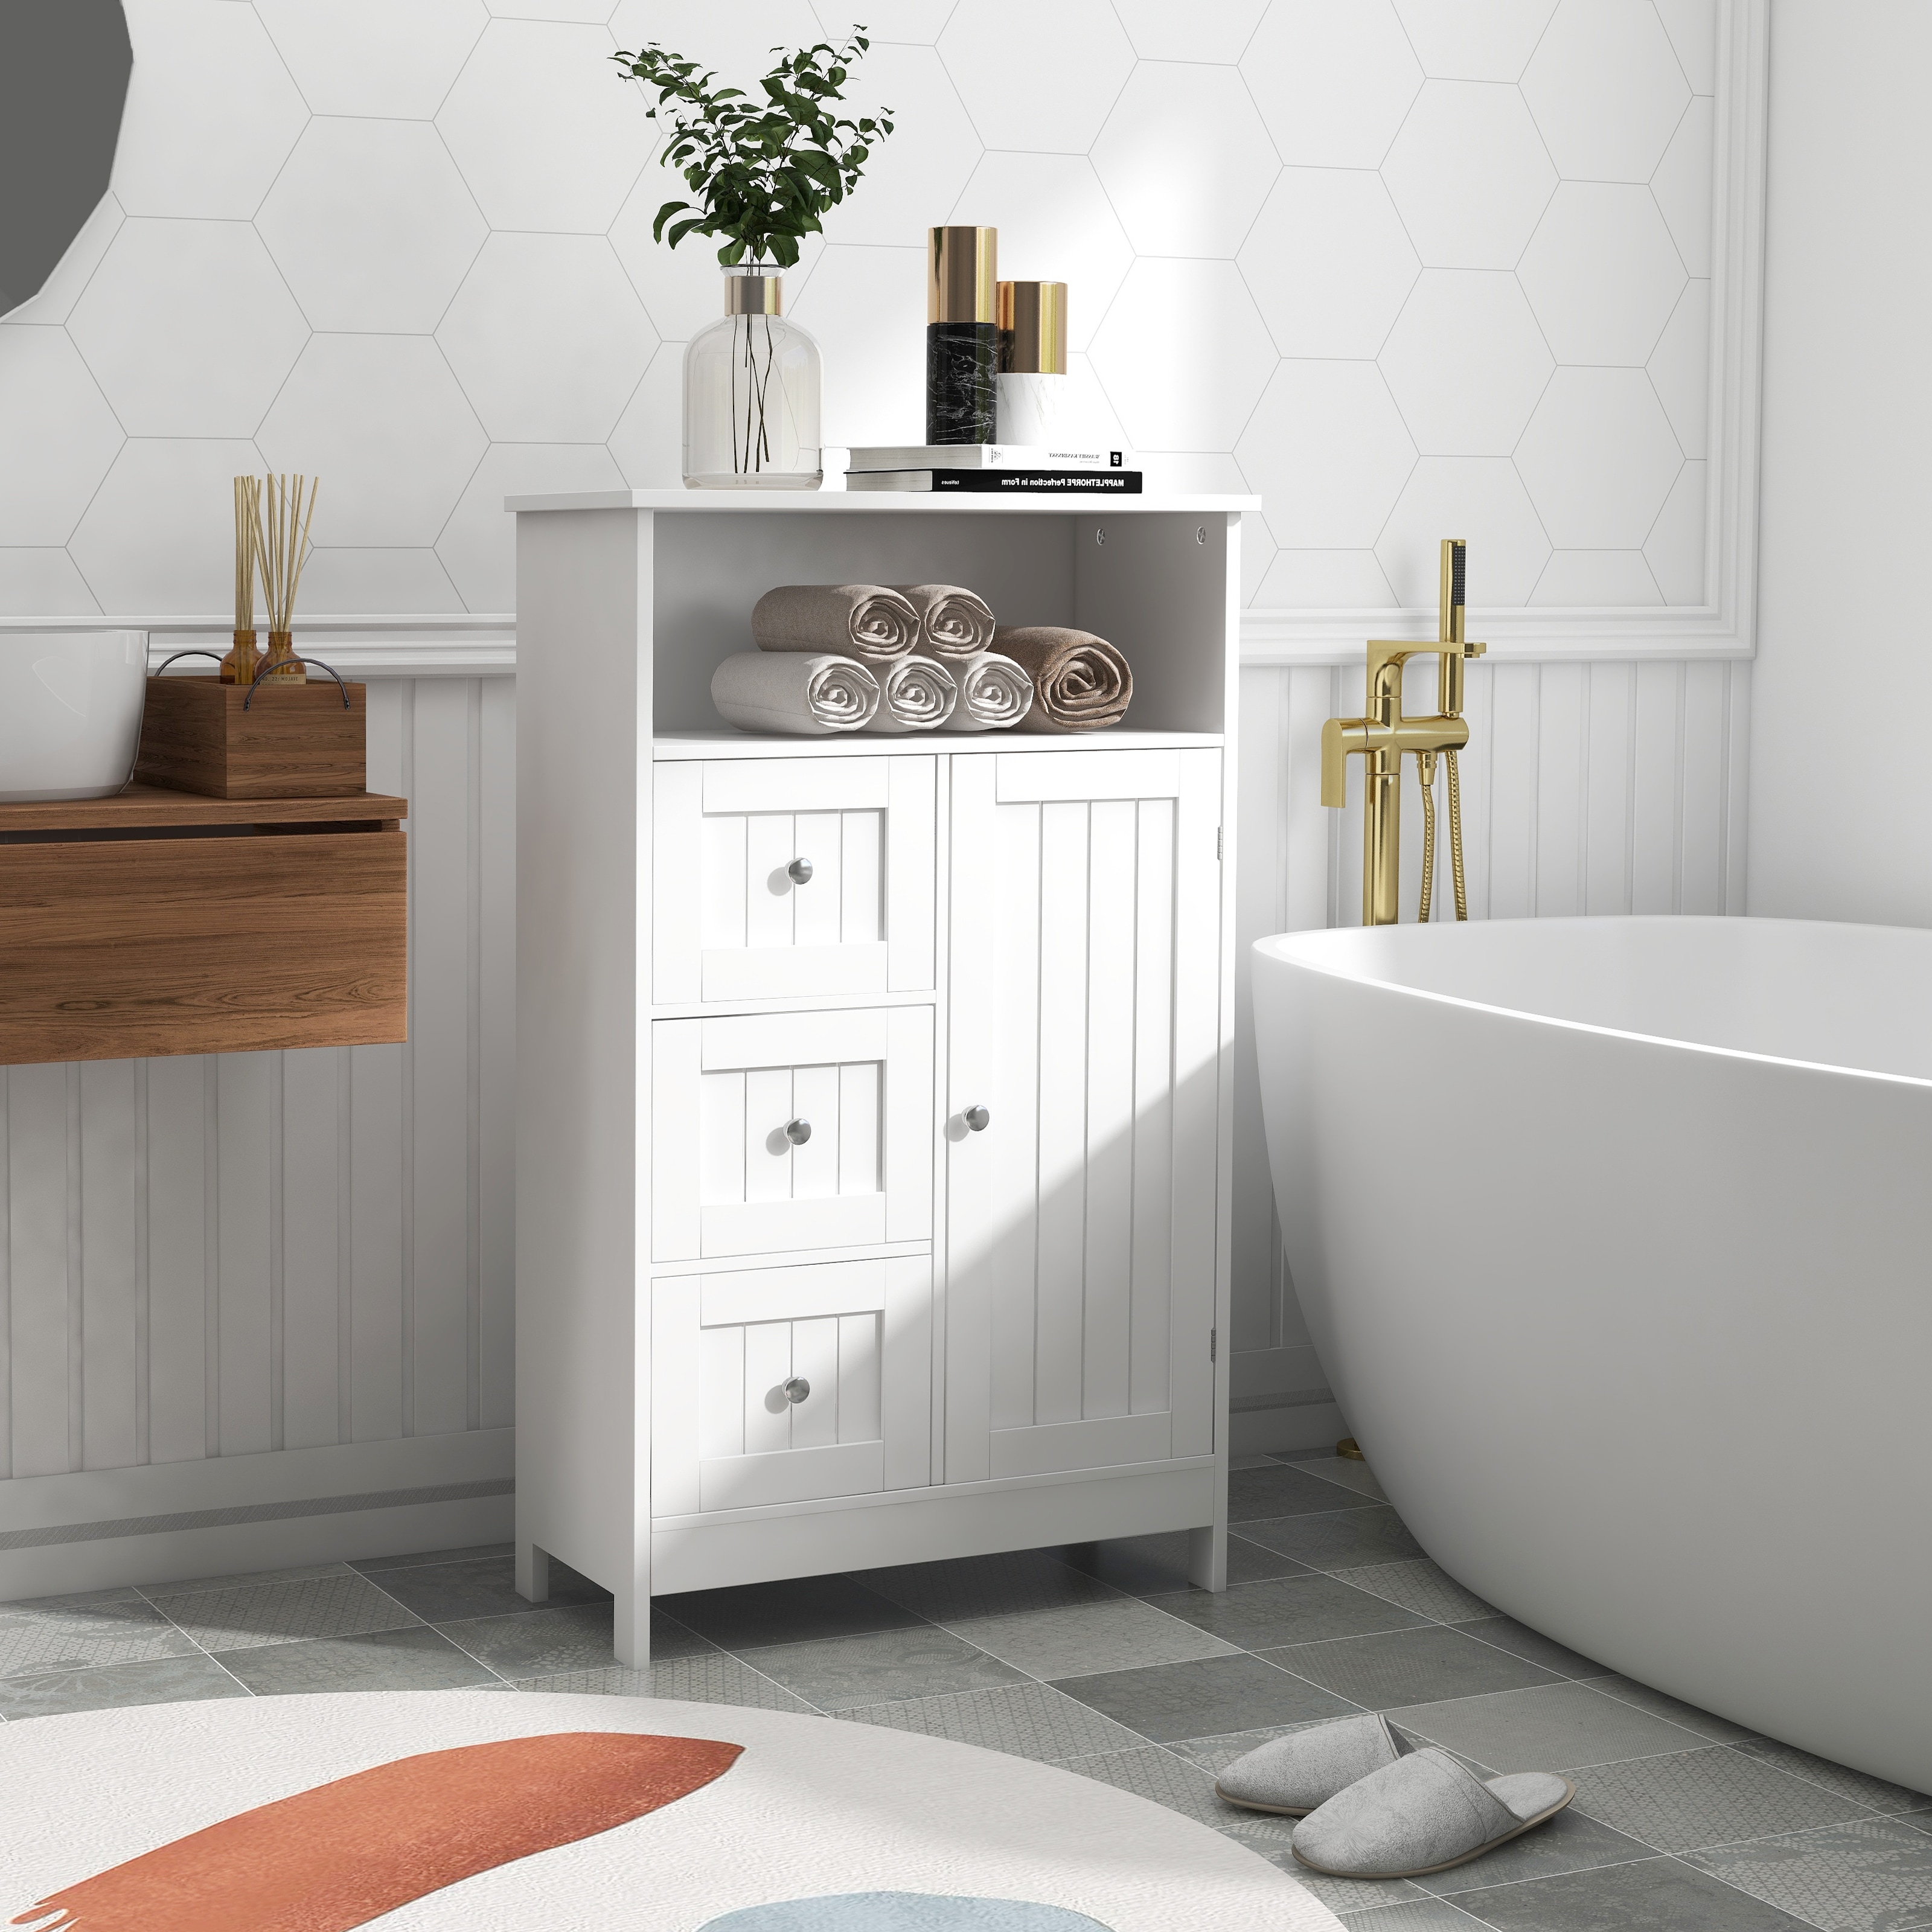 https://ak1.ostkcdn.com/images/products/is/images/direct/9f94ad4dd209d4063547387f64114c115d0ffe4d/Bathroom-Storage-Floor-Cabinet-with-Pull-out-Drawers-and-Door.jpg